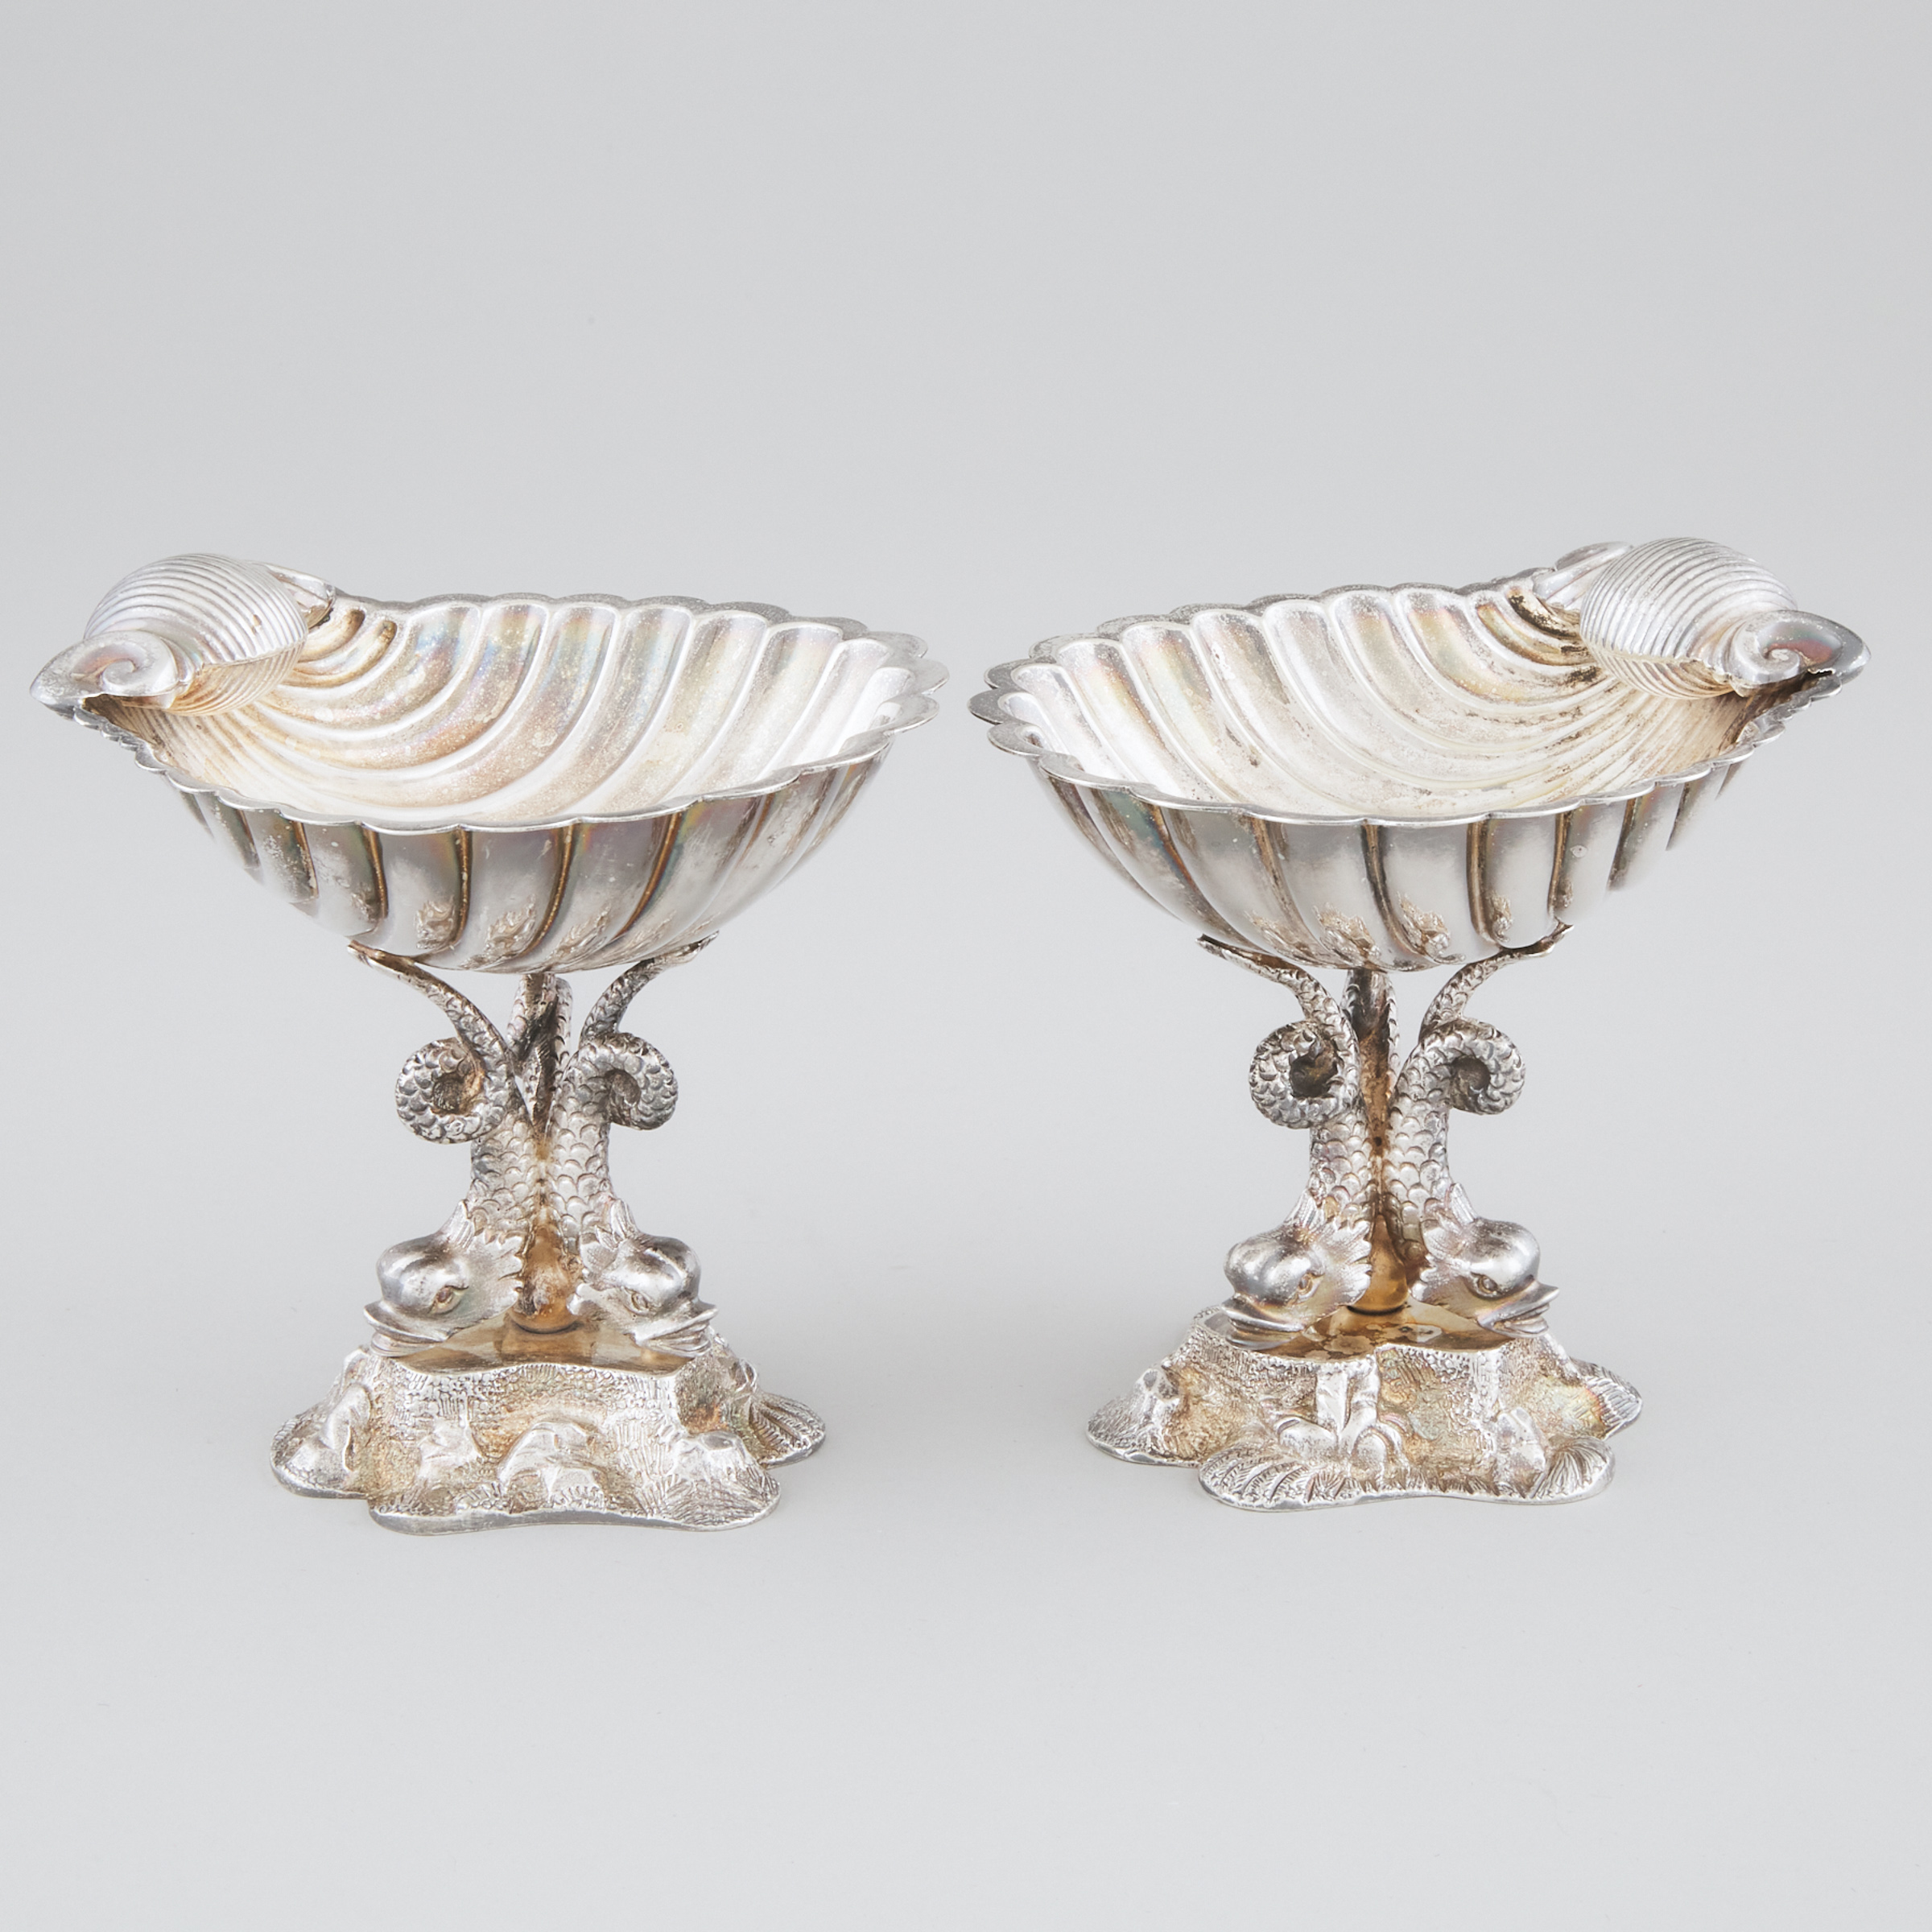 Pair of Victorian Silver Plated Shell Form Dishes, William Hutton & Sons, c.1900